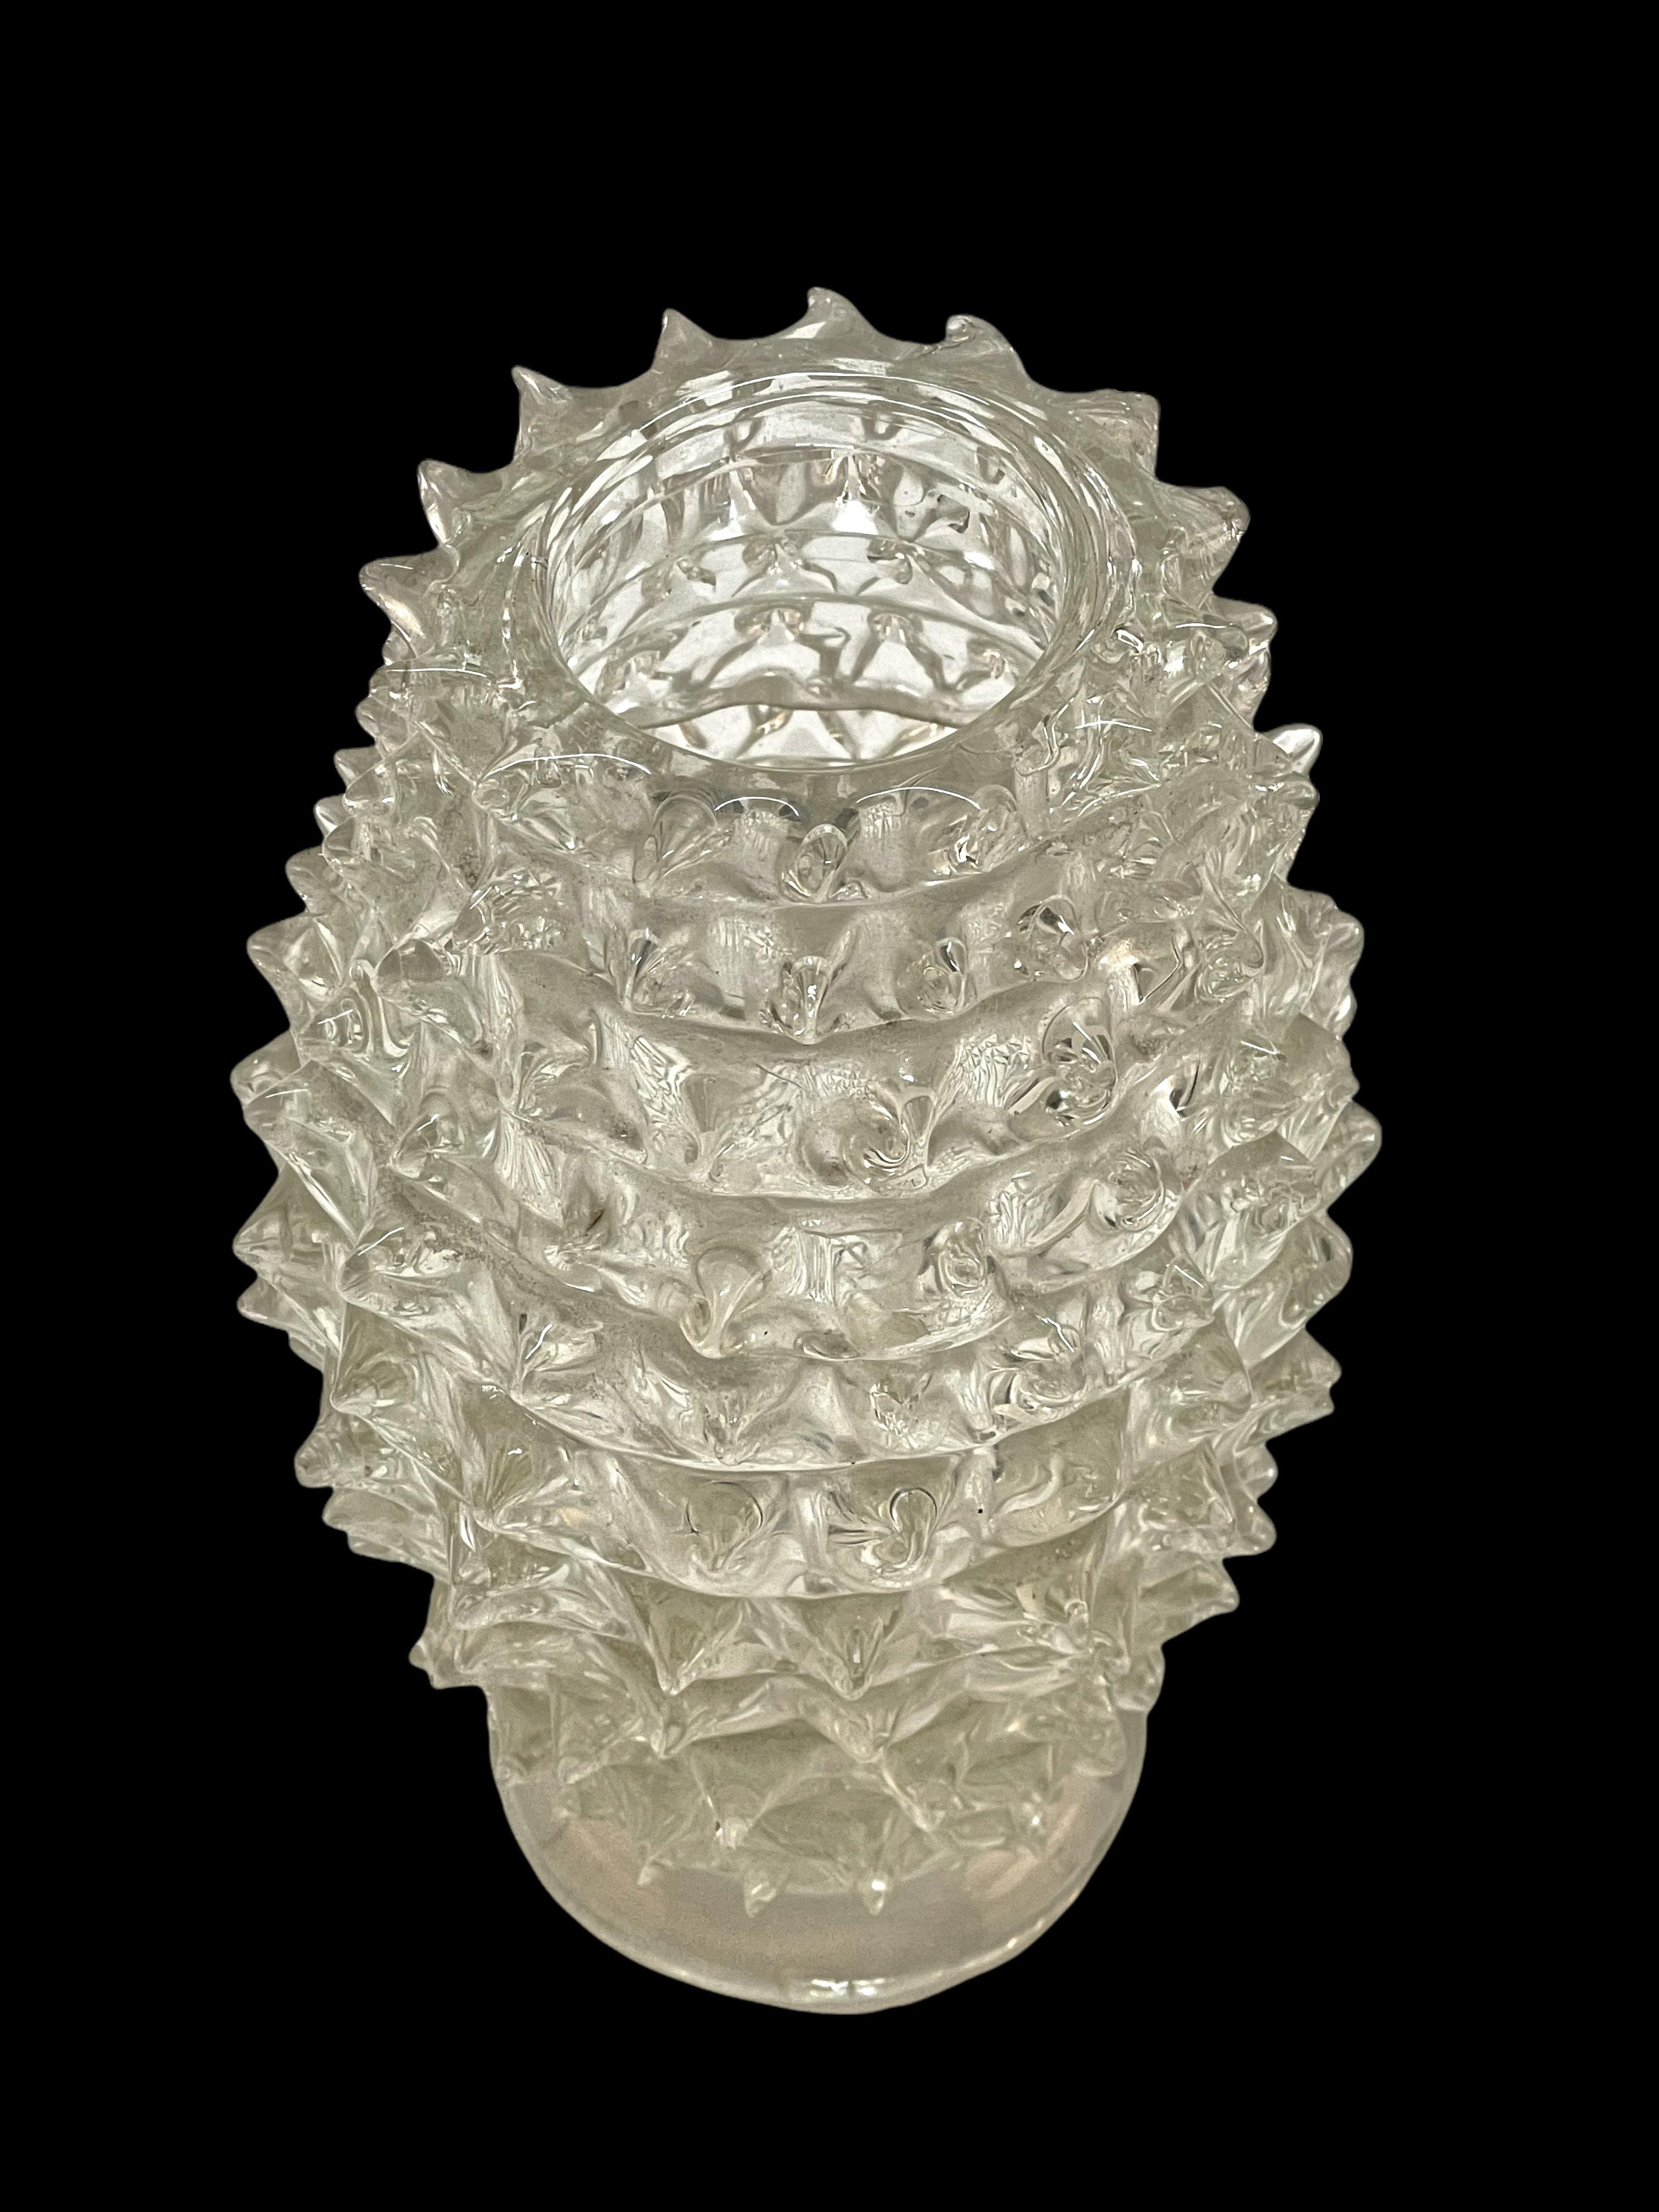 Mouthblown rostrato crystal Murano glass vase. This wonderful piece was produced during the 1940s in Italy by Ercole Barovier for Barovier & Toso.

This item is fantastic thanks to the incredible workmanship of the Rostrato glass will match